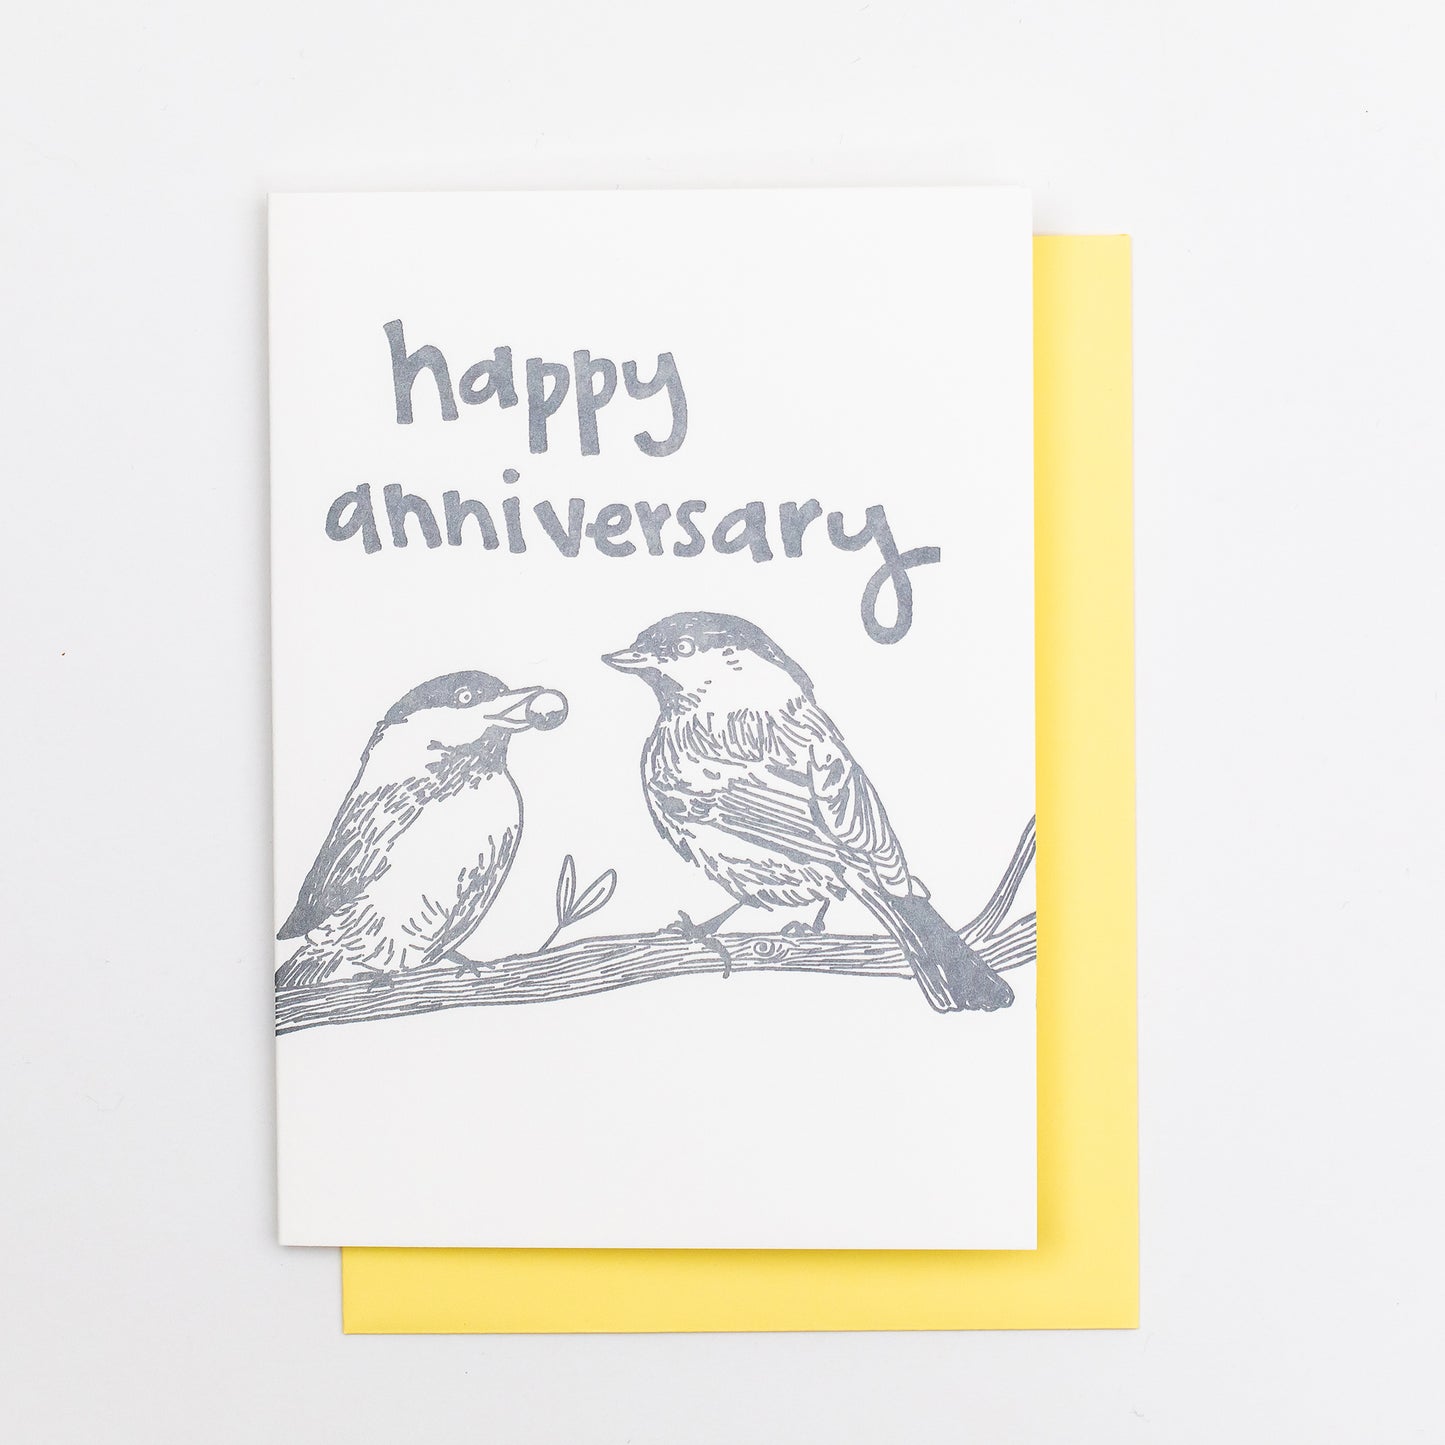 Letterpress greeting card featuring hand-drawn chickadees, printed in a shimmery silver ink. Whimsical hand-drawn text saying "Happy Anniversary" is shown on the top of the card, in the same silver ink. The card is white, blank inside, and is paired with a light yellow envelope.